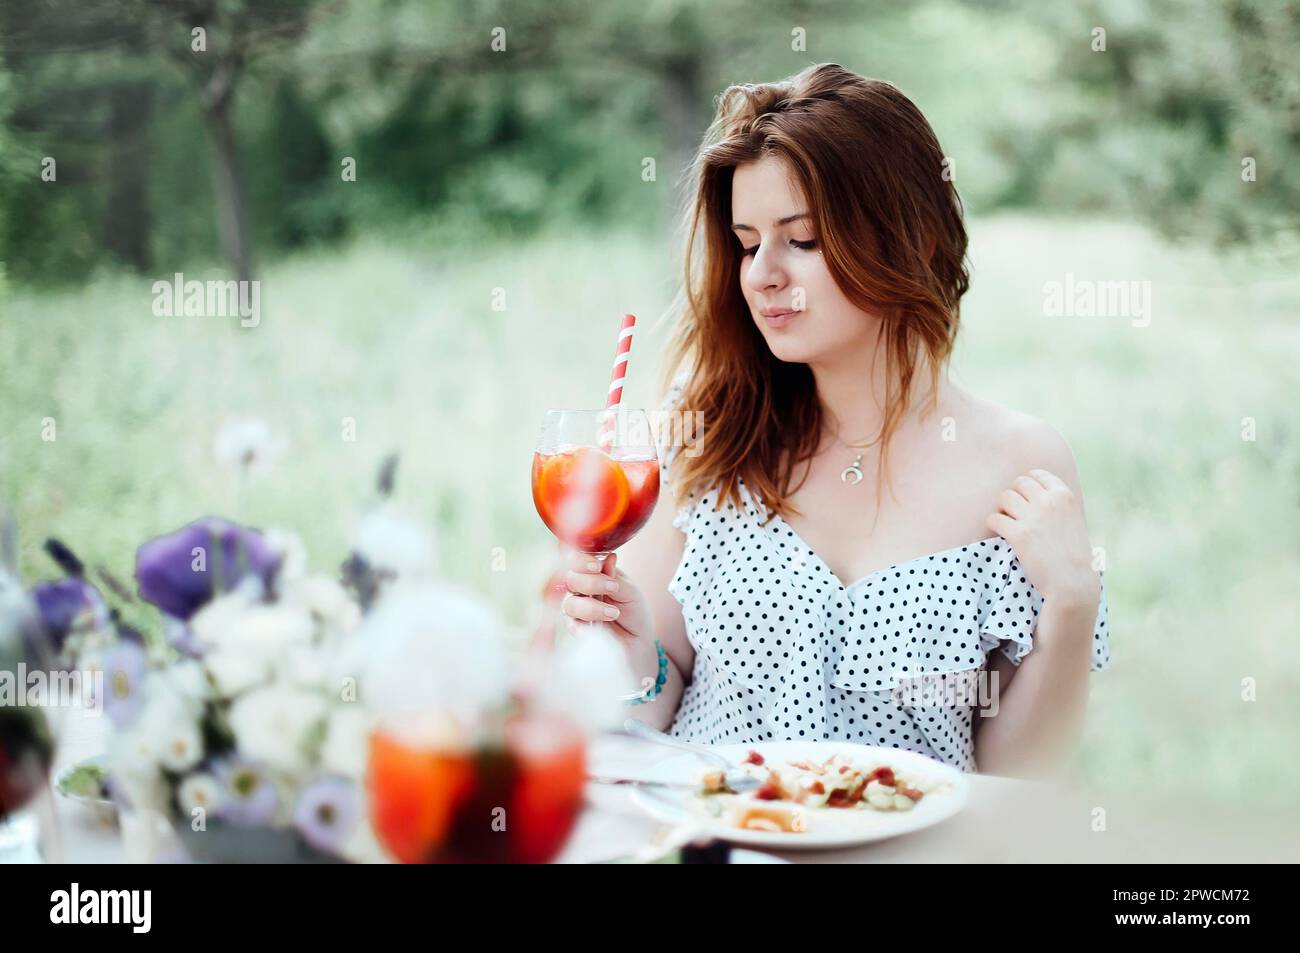 Happy young female with alcohol cocktail smiling and proposing toast while sitting at table during banquet in garden Stock Photo